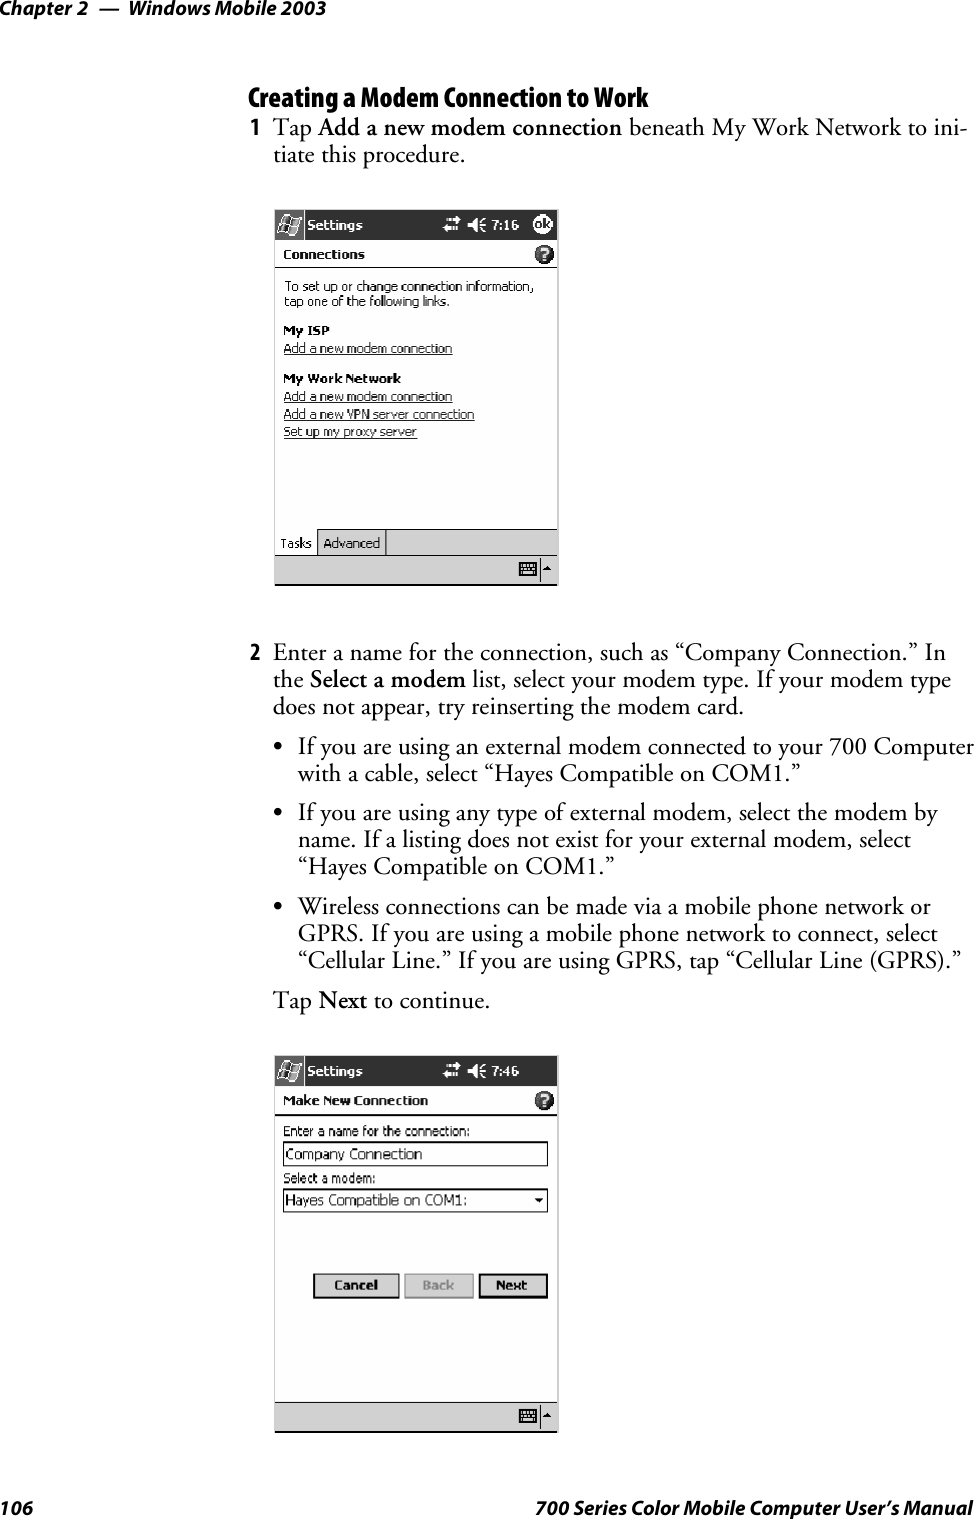 Windows Mobile 2003Chapter —2106 700 Series Color Mobile Computer User’s ManualCreating a Modem Connection to Work1Tap Add a new modem connection beneath My Work Network to ini-tiate this procedure.2Enter a name for the connection, such as “Company Connection.” Inthe Select a modem list, select your modem type. If your modem typedoes not appear, try reinserting the modem card.SIf you are using an external modem connected to your 700 Computerwith a cable, select “Hayes Compatible on COM1.”SIf you are using any type of external modem, select the modem byname. If a listing does not exist for your external modem, select“Hayes Compatible on COM1.”SWireless connections can be made via a mobile phone network orGPRS. If you are using a mobile phone network to connect, select“Cellular Line.” If you are using GPRS, tap “Cellular Line (GPRS).”Tap Next to continue.